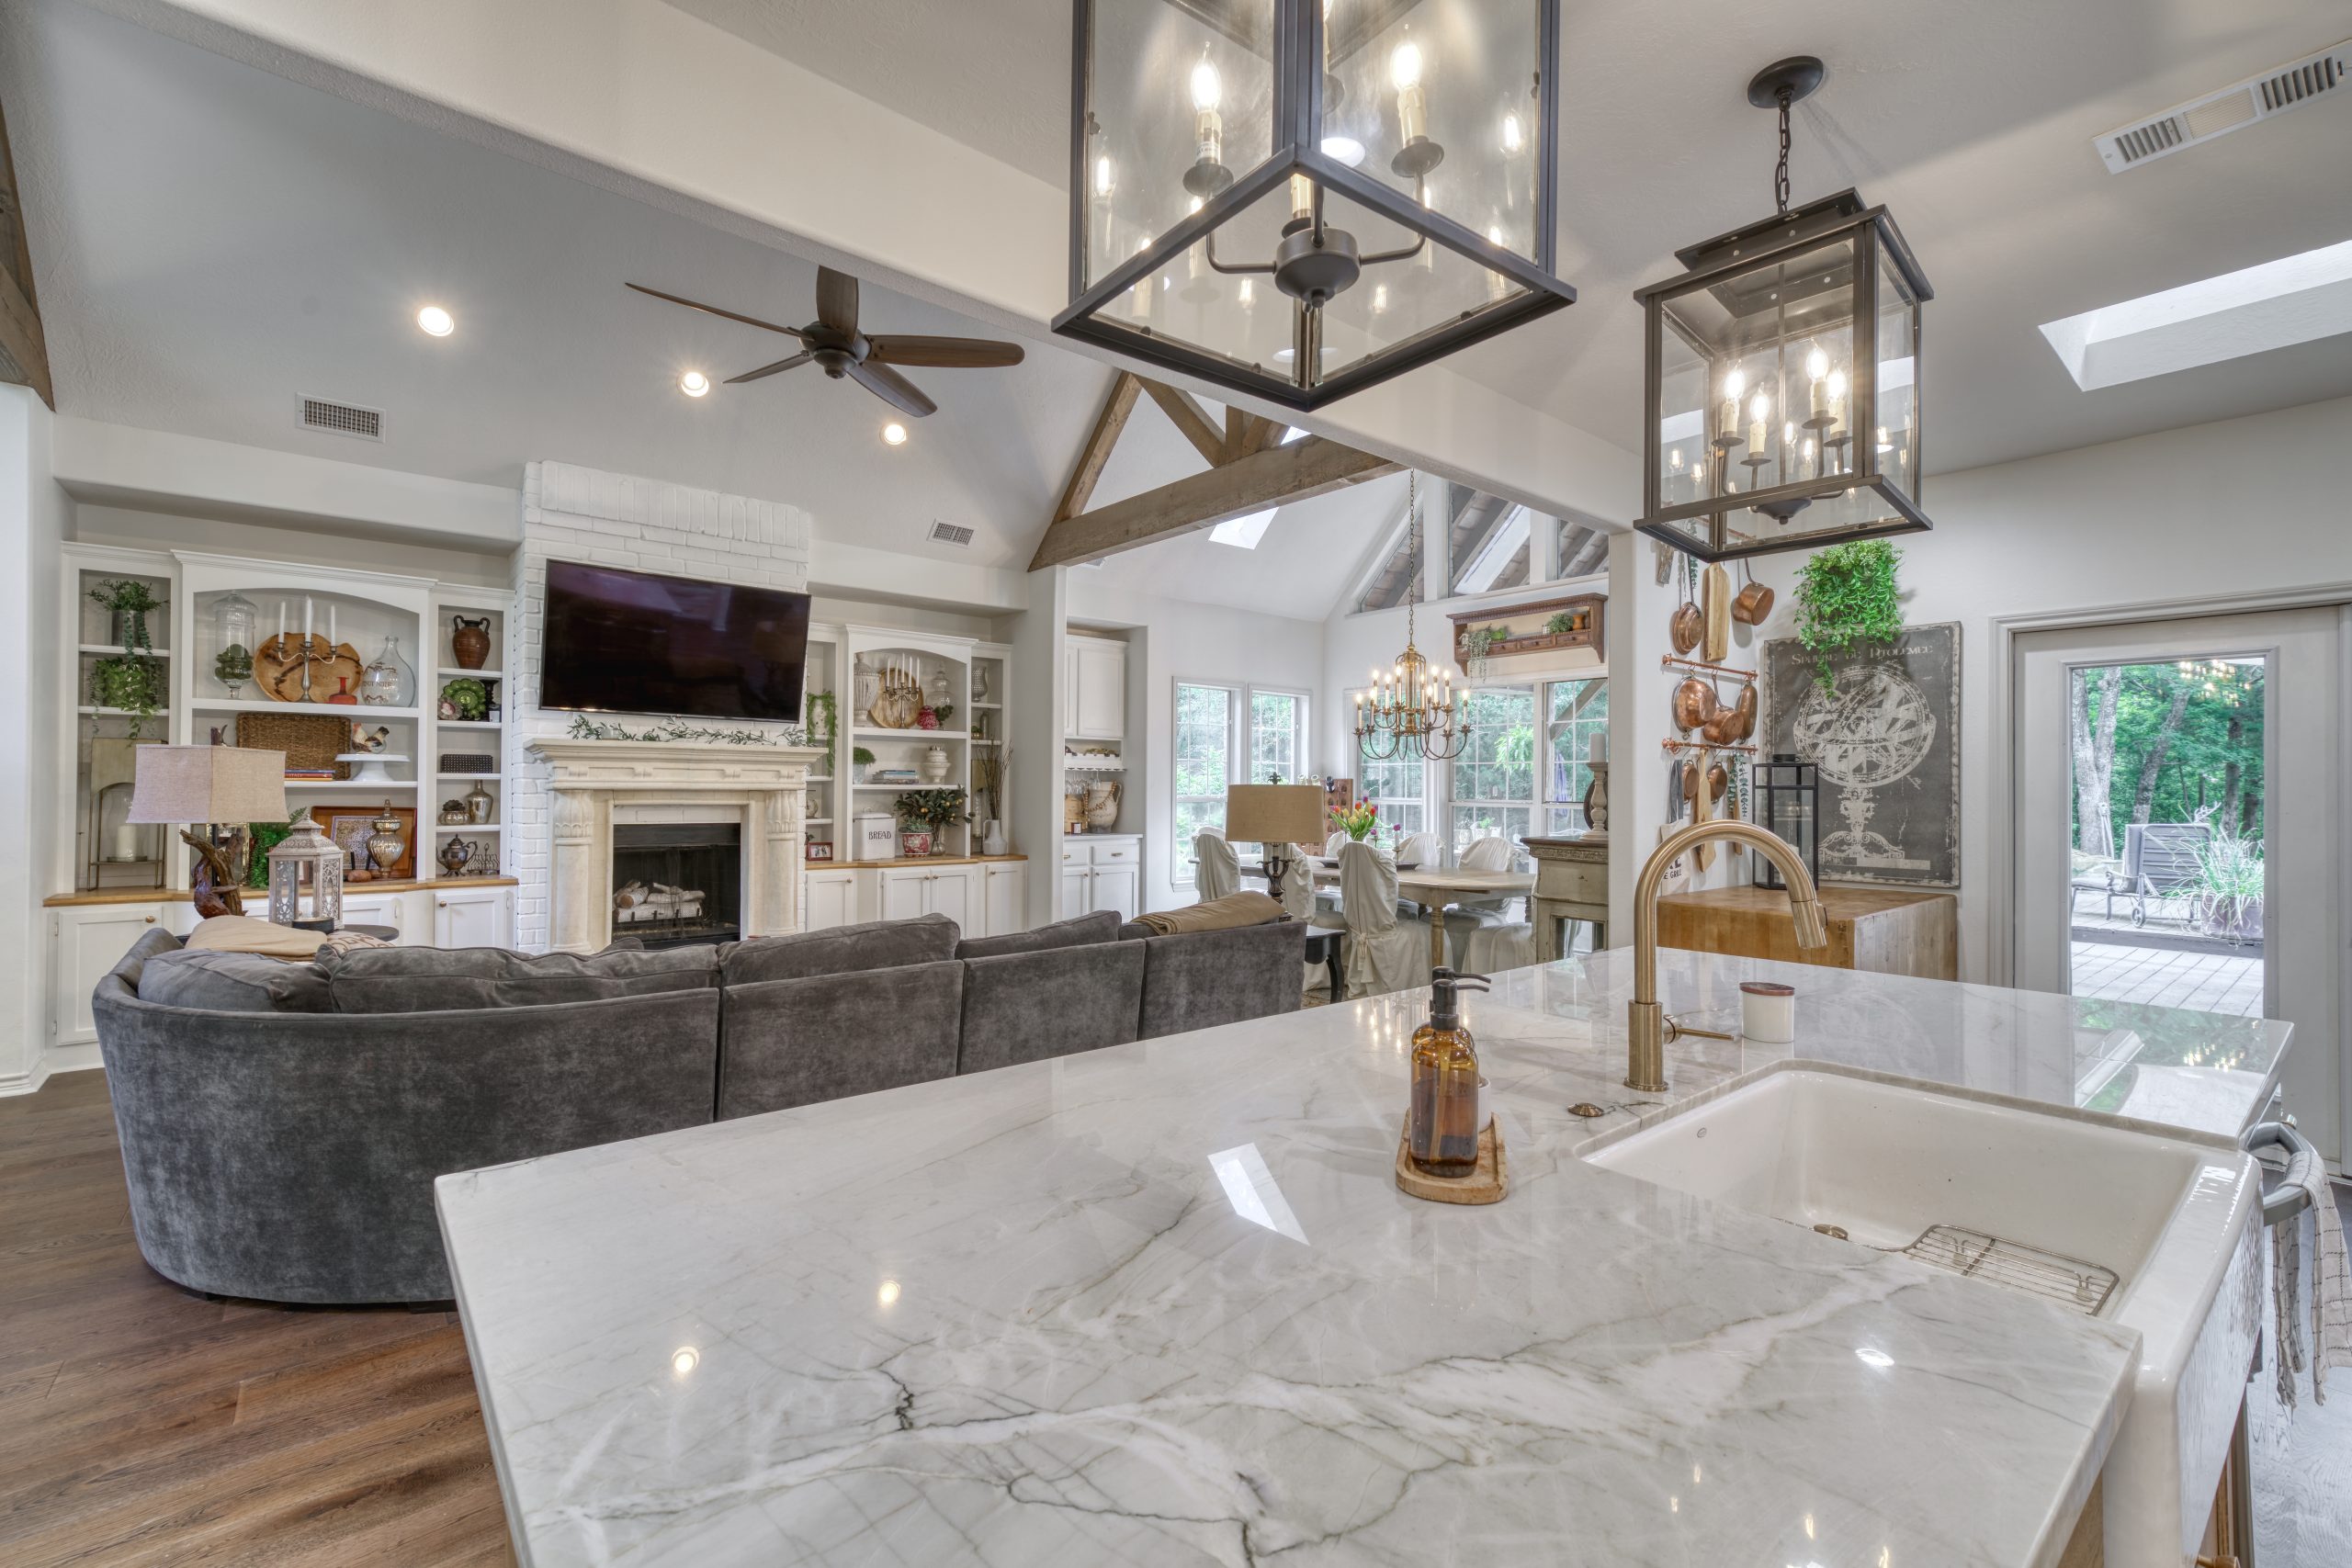 Good Company Construction in Bryan, Texas - Image of a Kitchen with living room